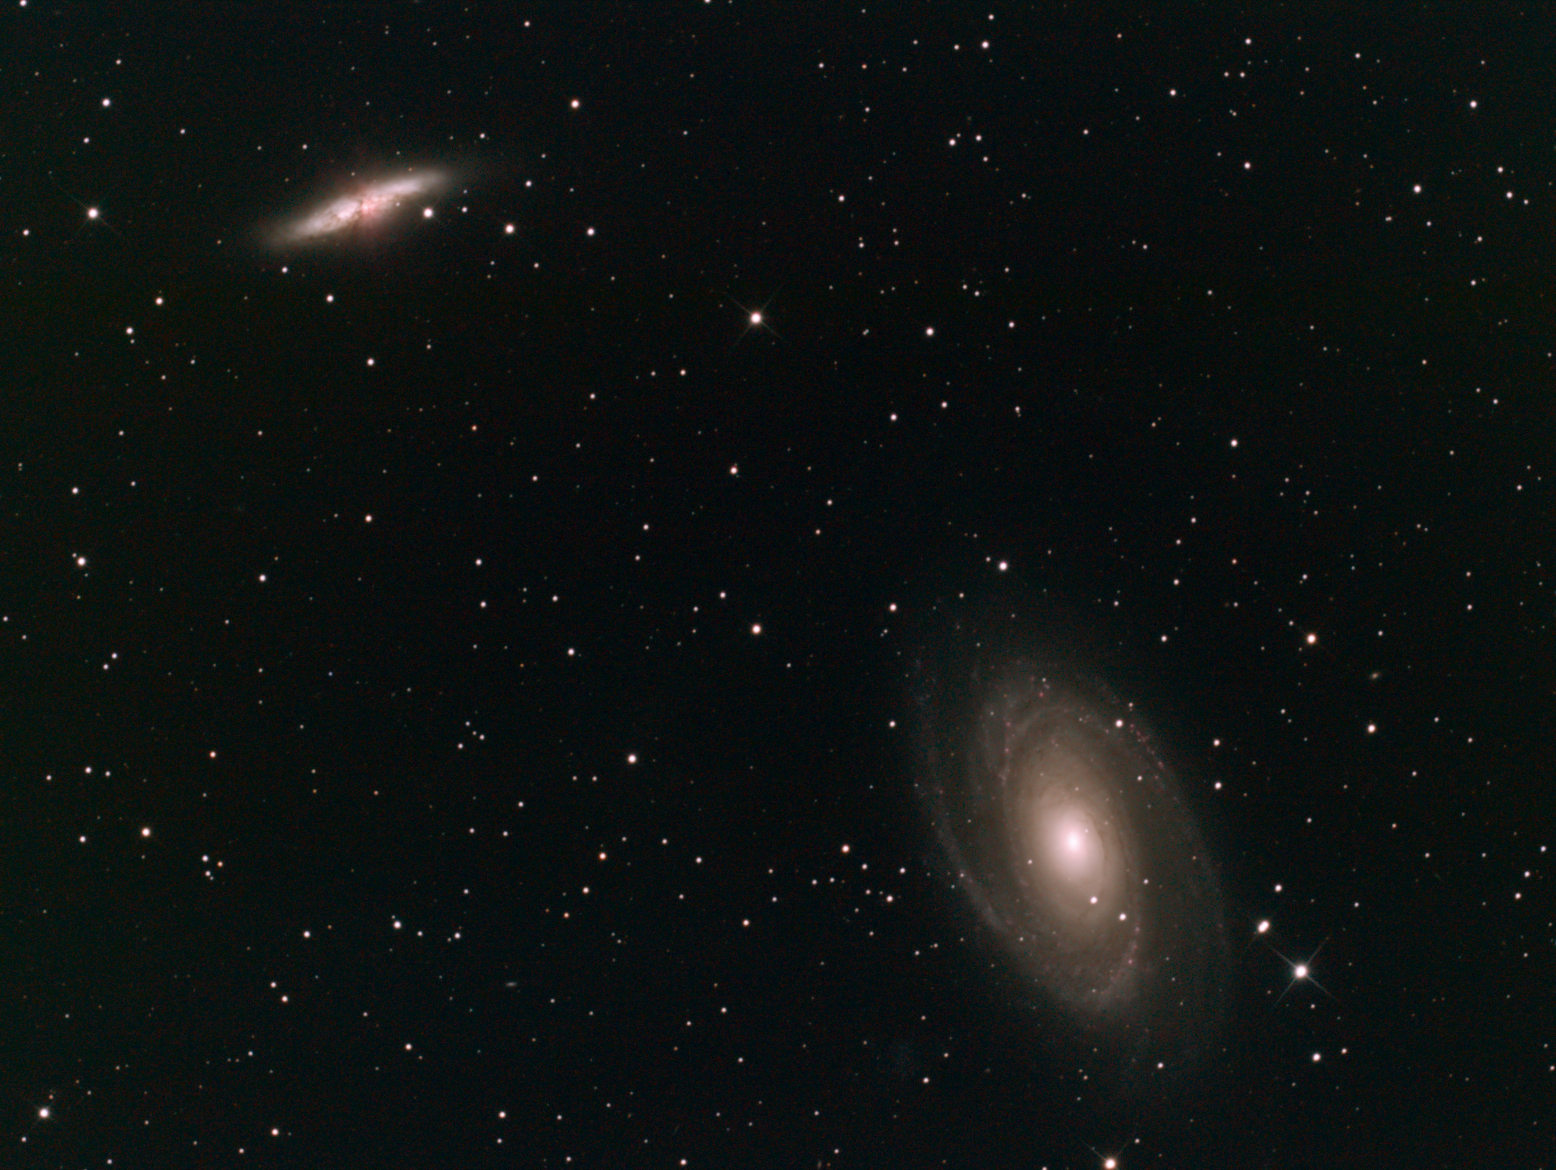 image from Bode's Galaxy & Cigar Galaxy